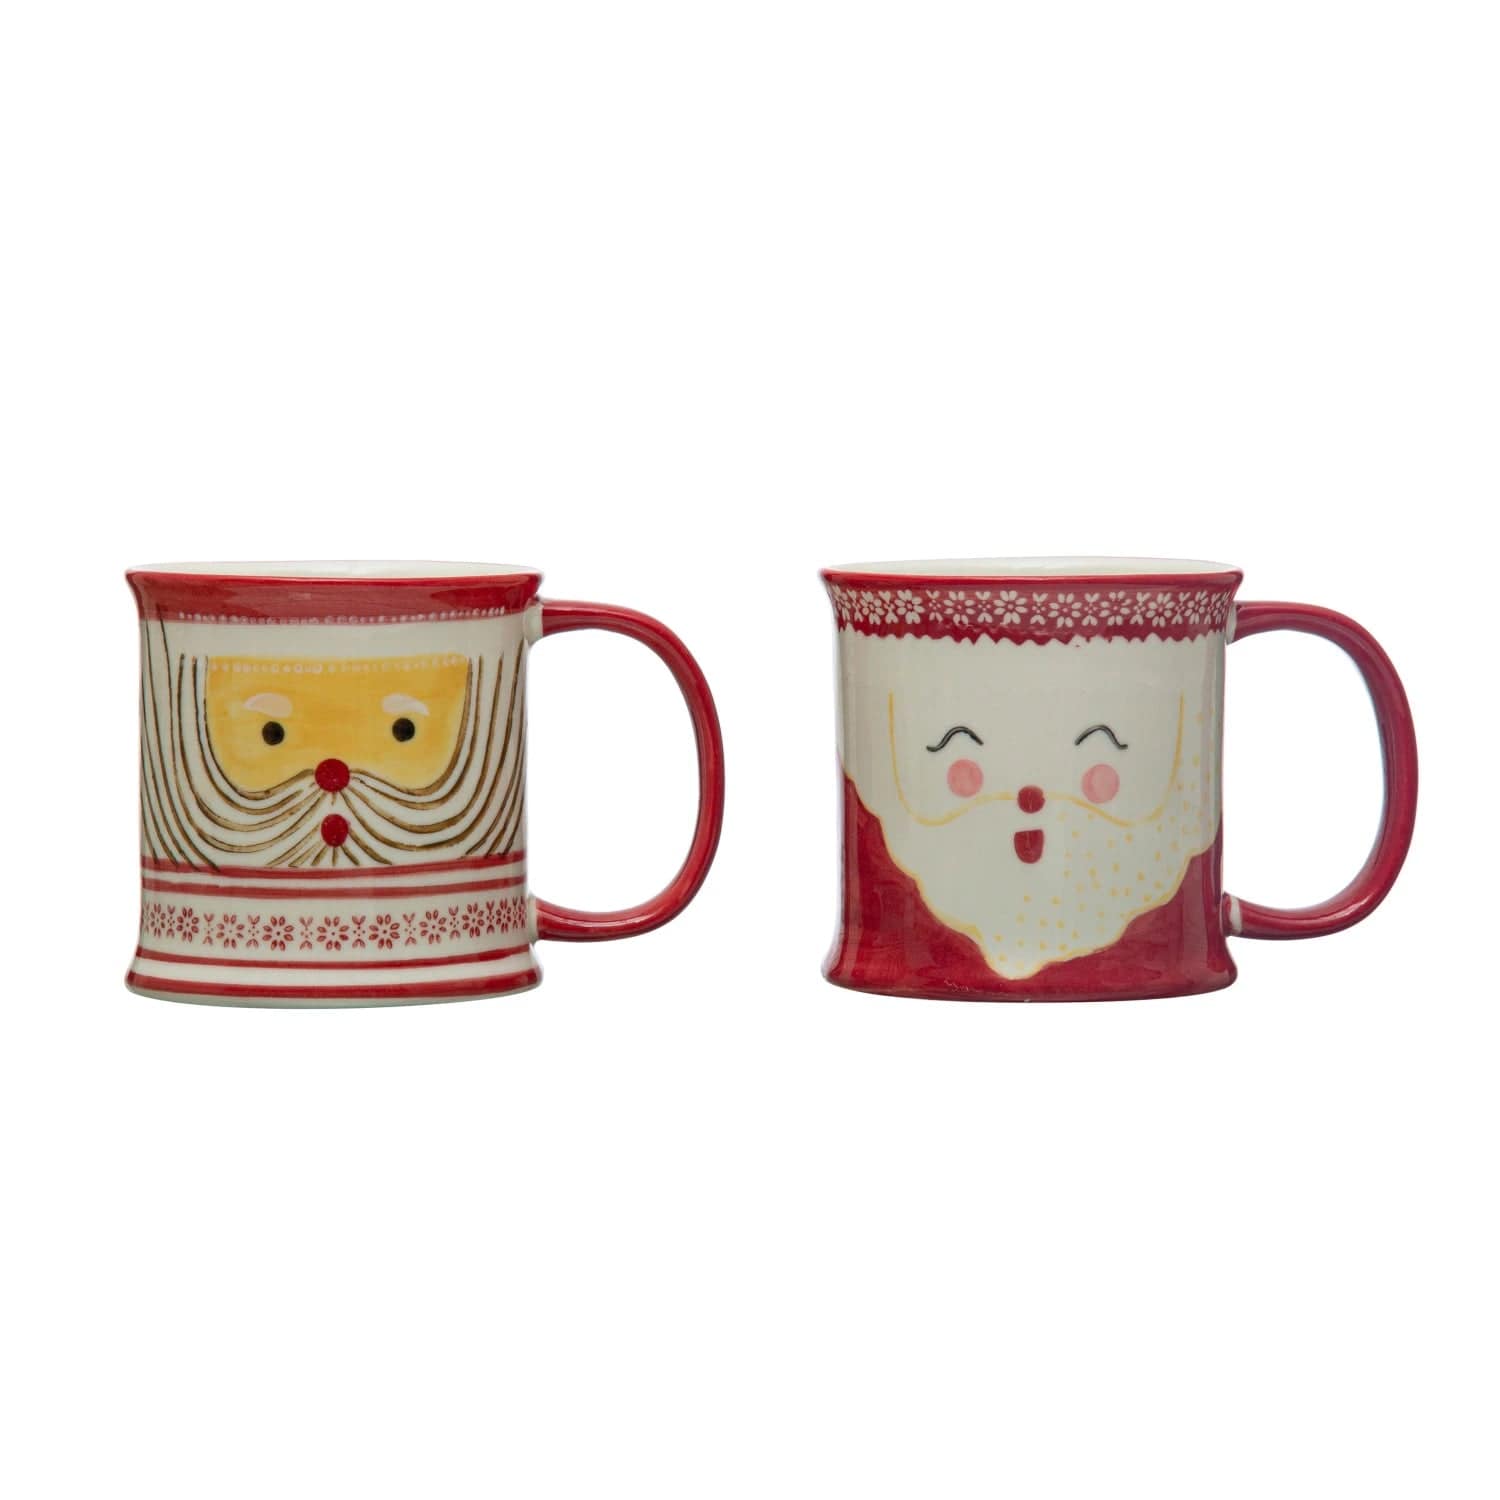 Creative Co-Op Creative Co-op Hand-Painted Stoneware Mug with Santa, Available in 2 Styles - Little Miss Muffin Children & Home